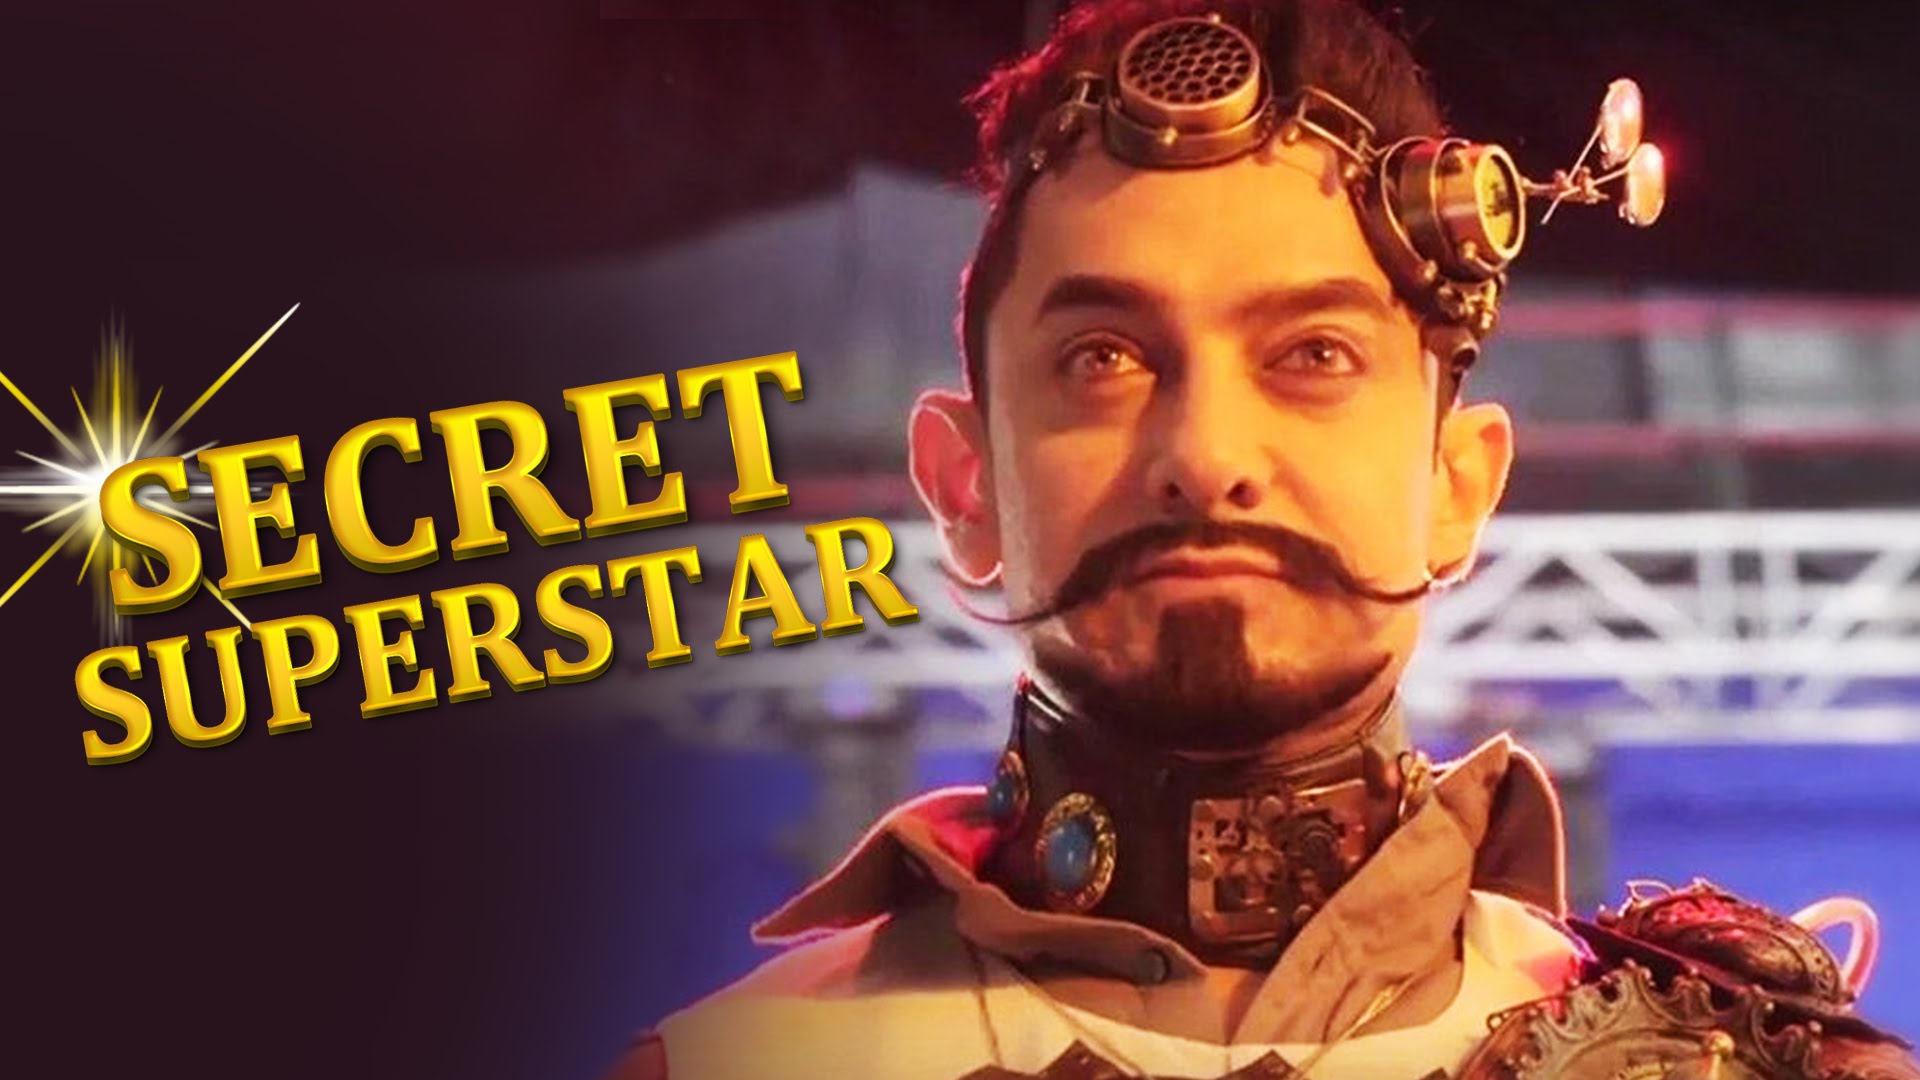 Secret Superstar Movie Review: Story about Dreams, Love, Friendship and much more 2